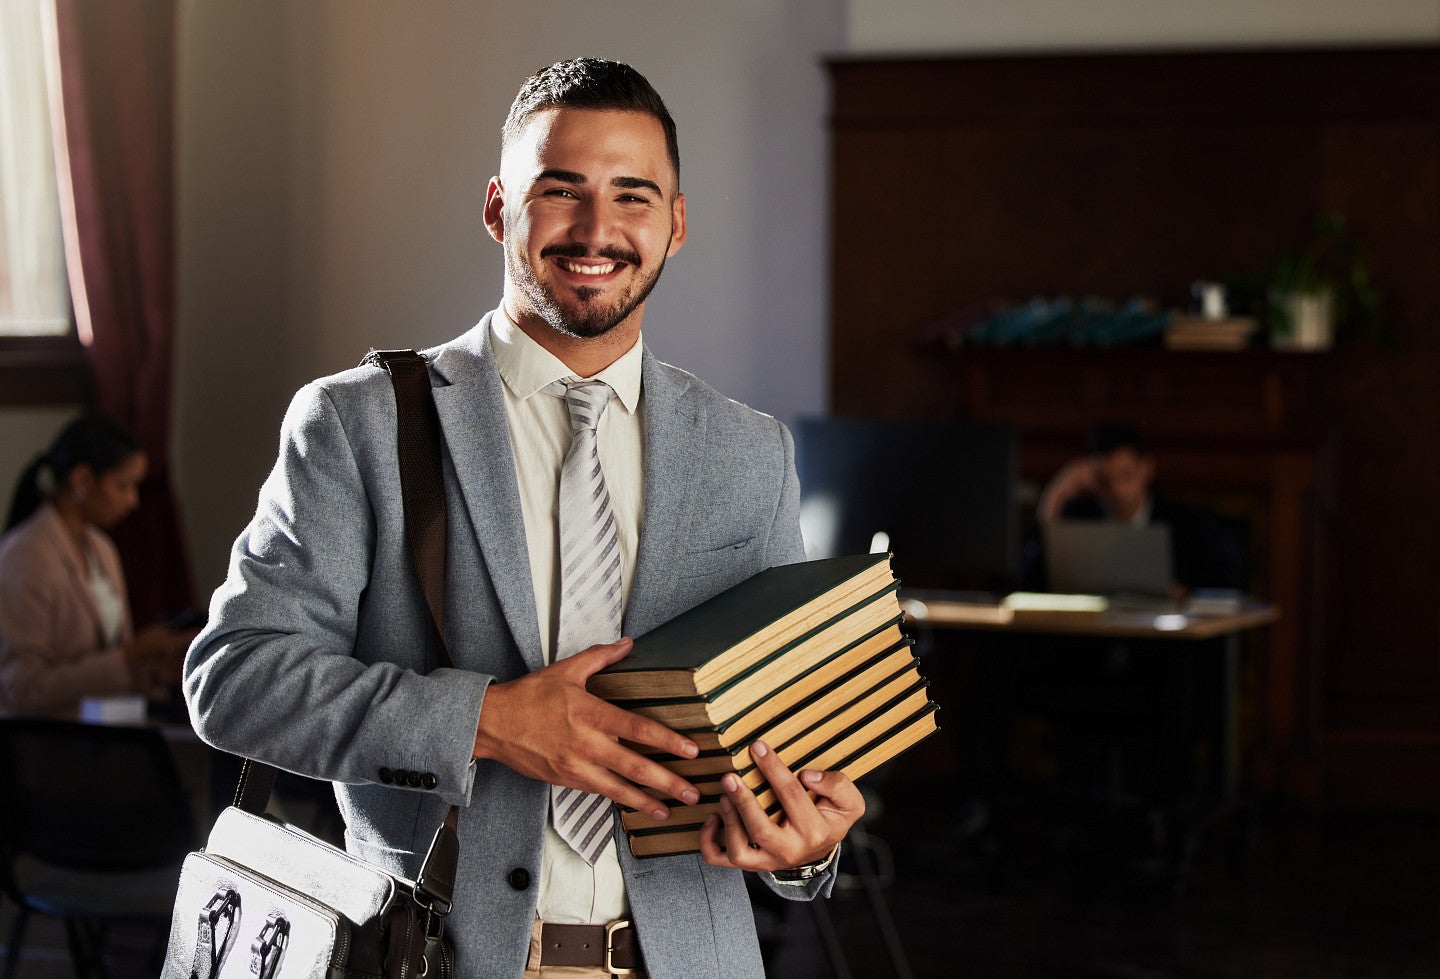 Law student smiling and holding a stack of books